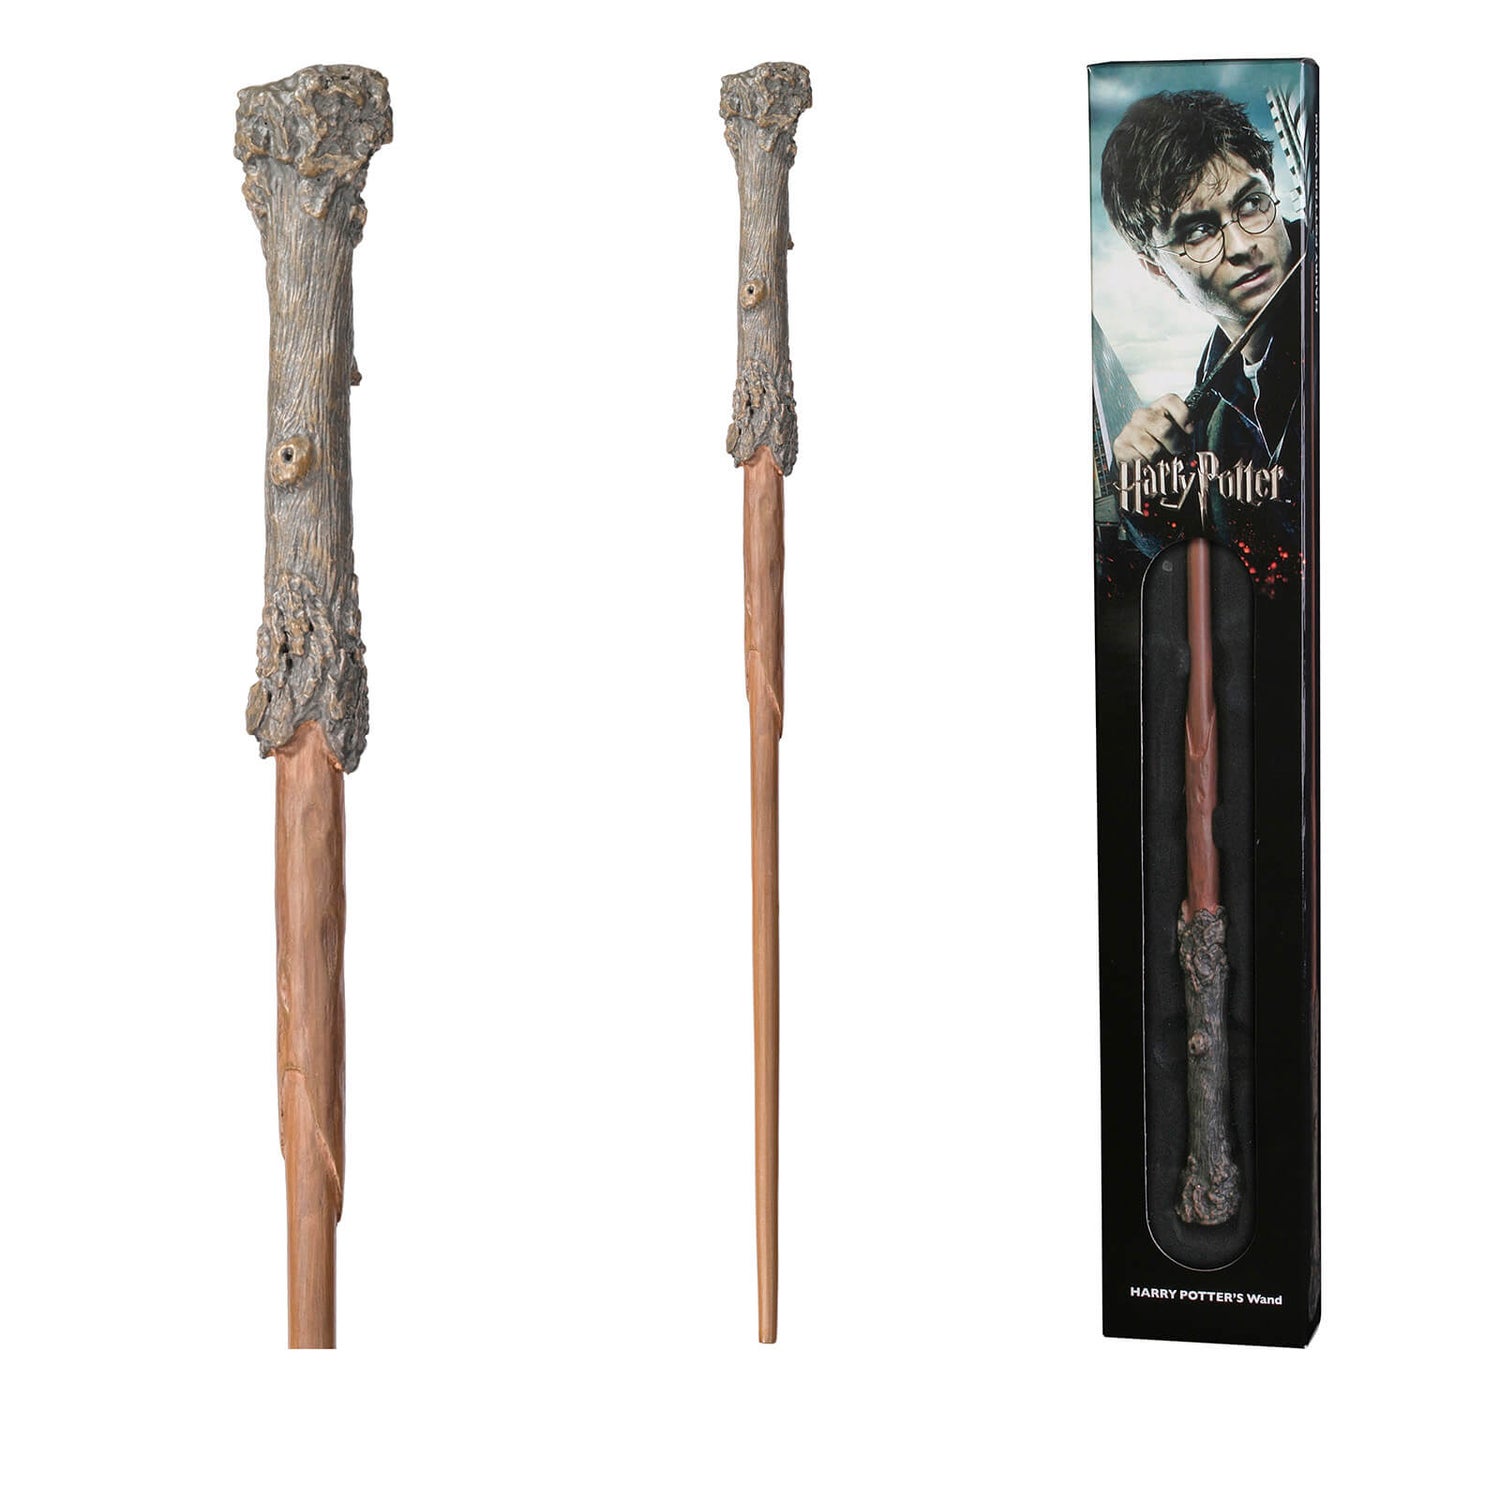 Harry Potter Harry Potter's Wand with Window Box